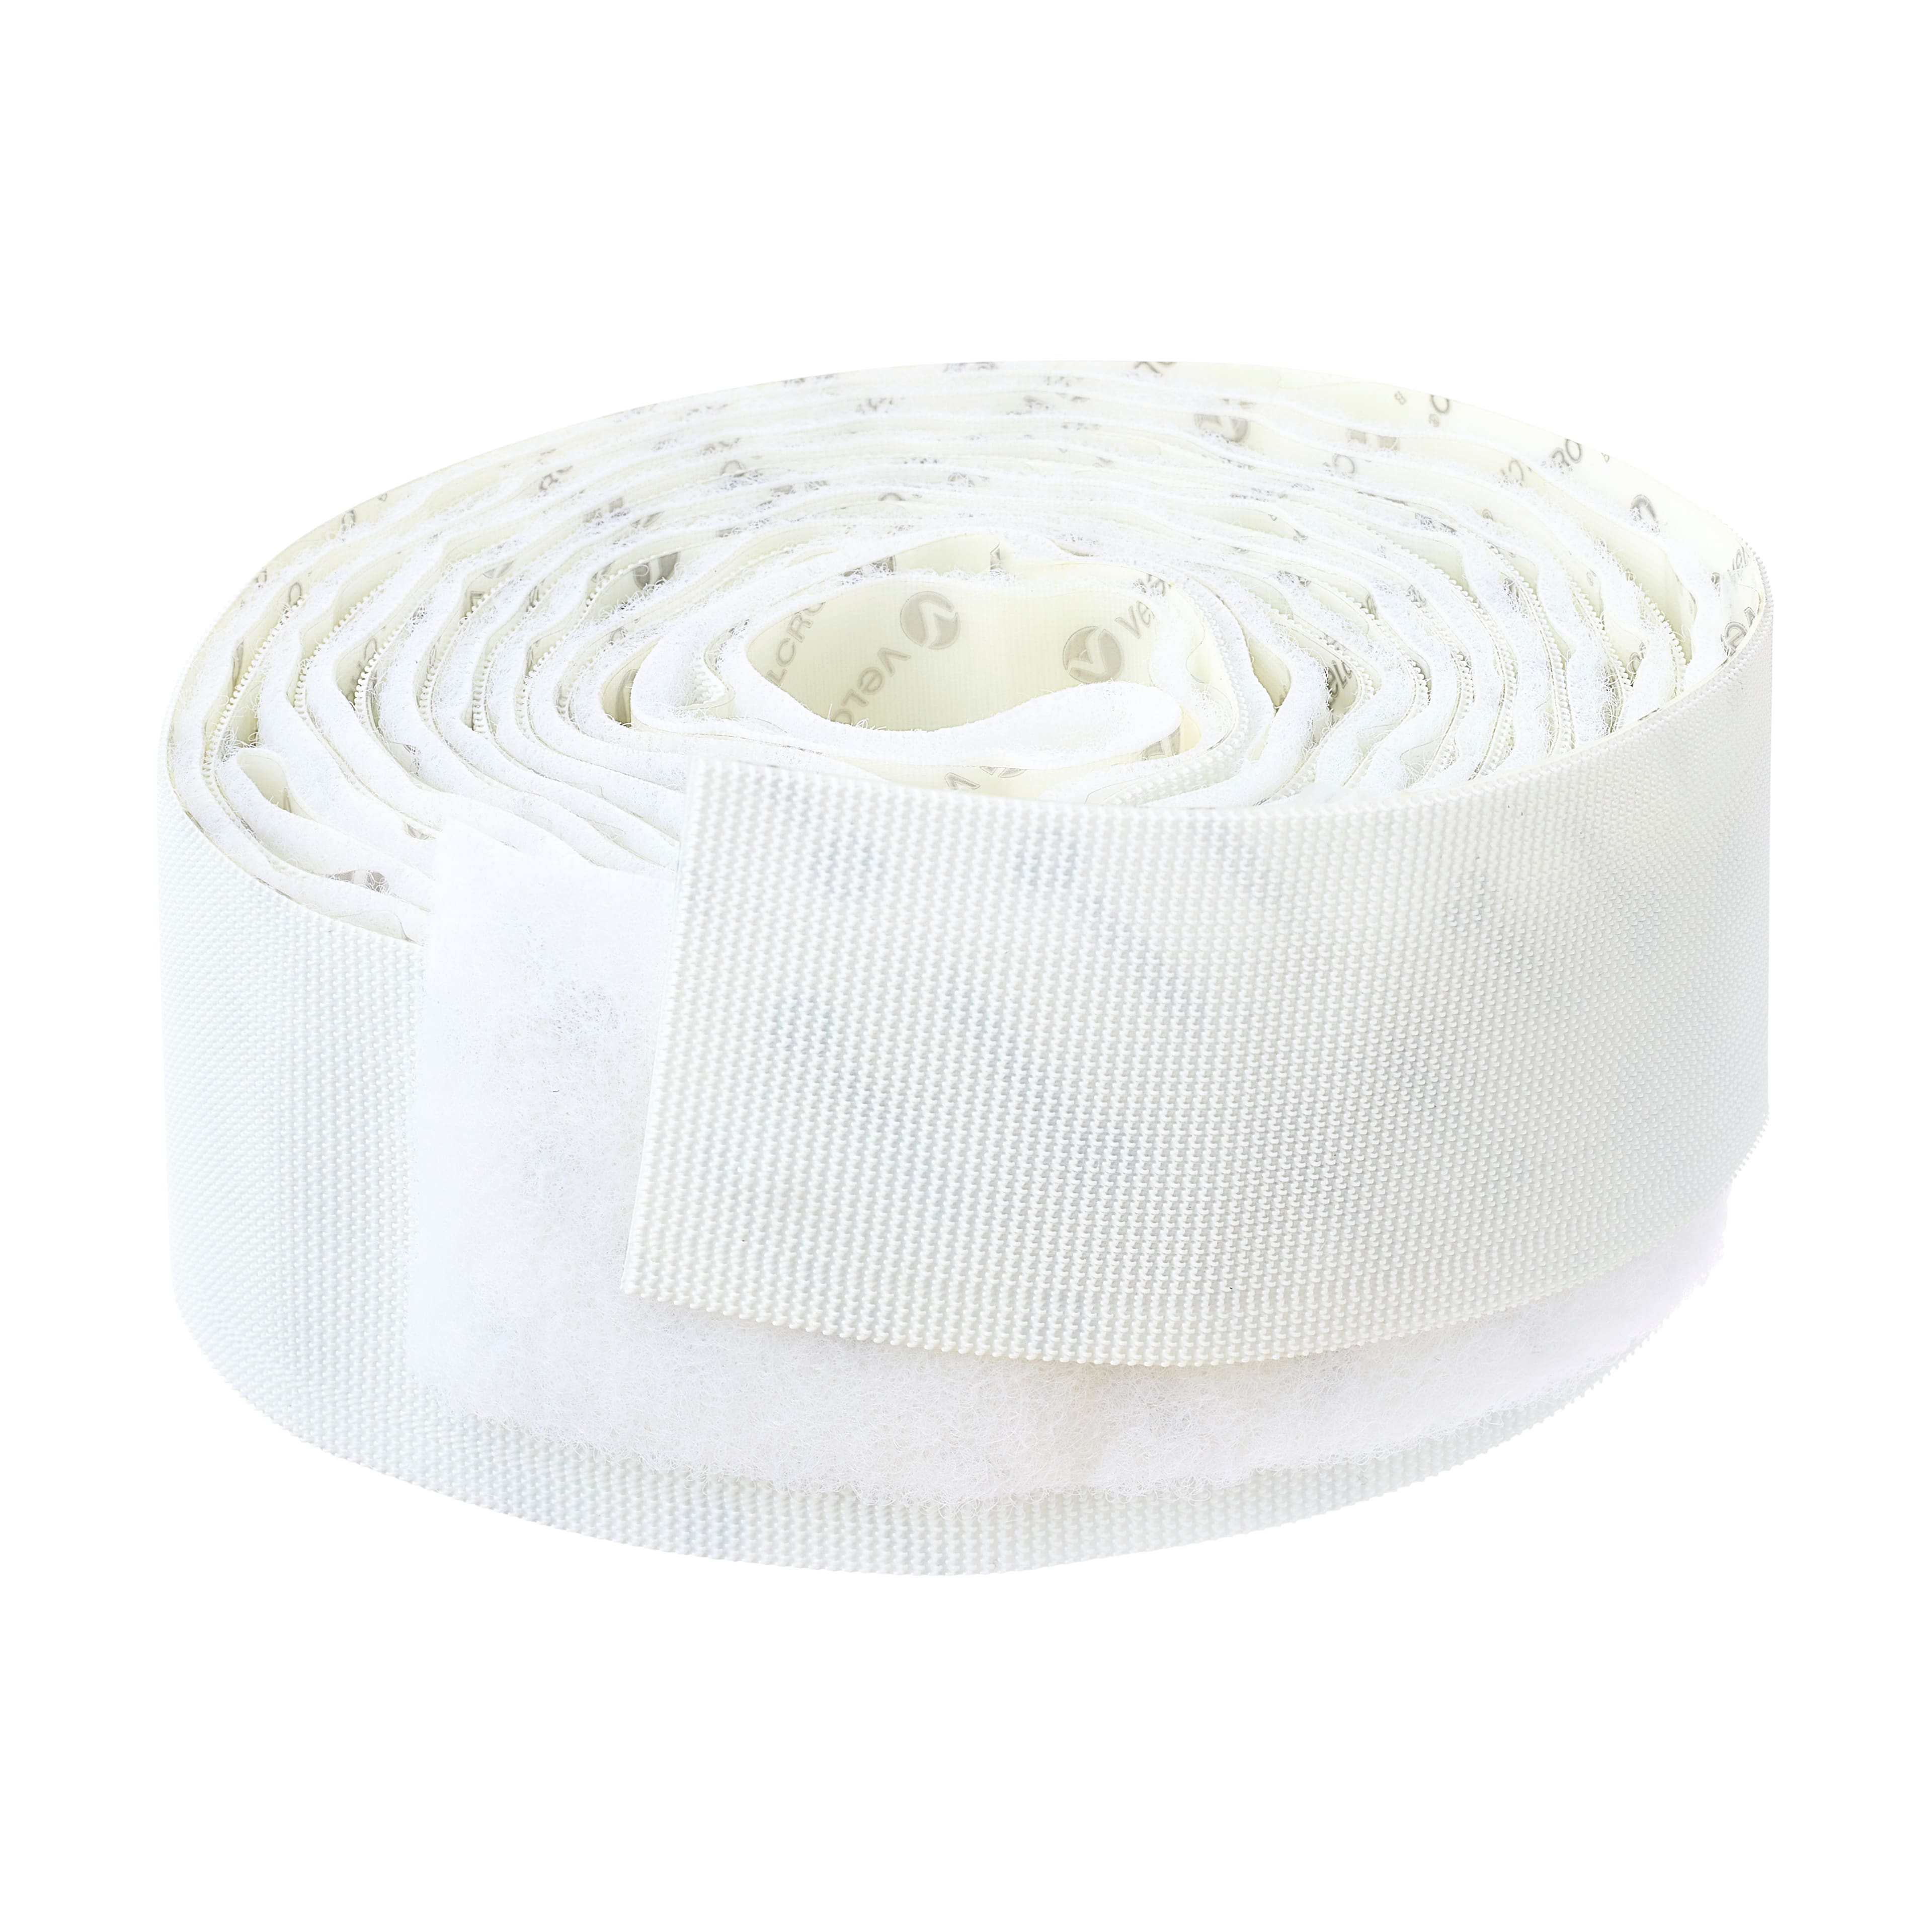 Velcro Tape in a Roll on a White Background Stock Photo - Image of  material, electrician: 162926484